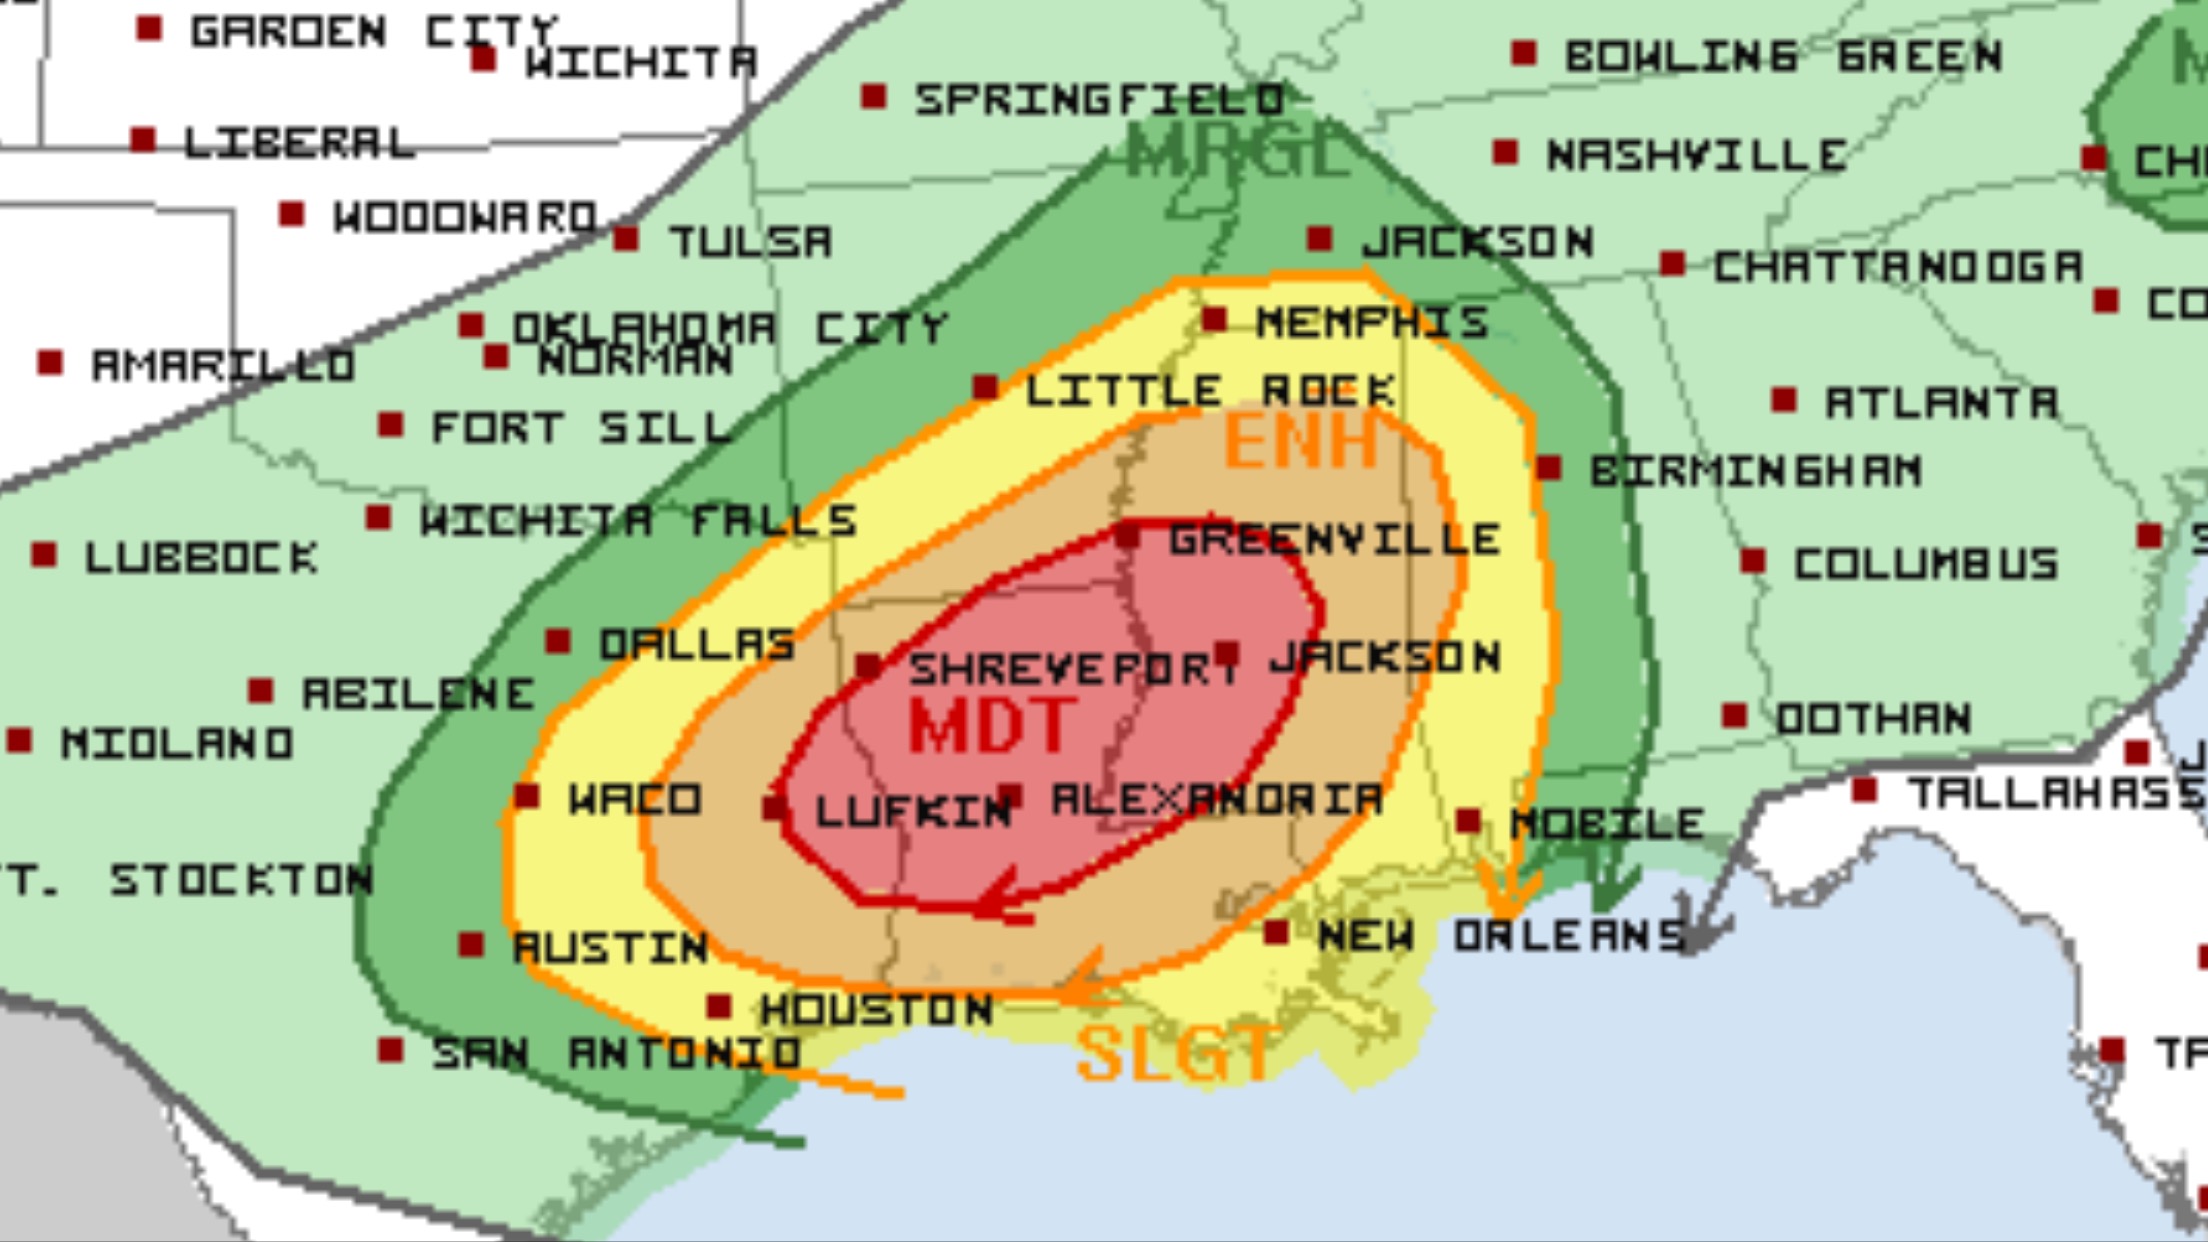 Tornado Outbreak Possible for Southern Central United States - Higgins Storm Chasing2208 x 1242